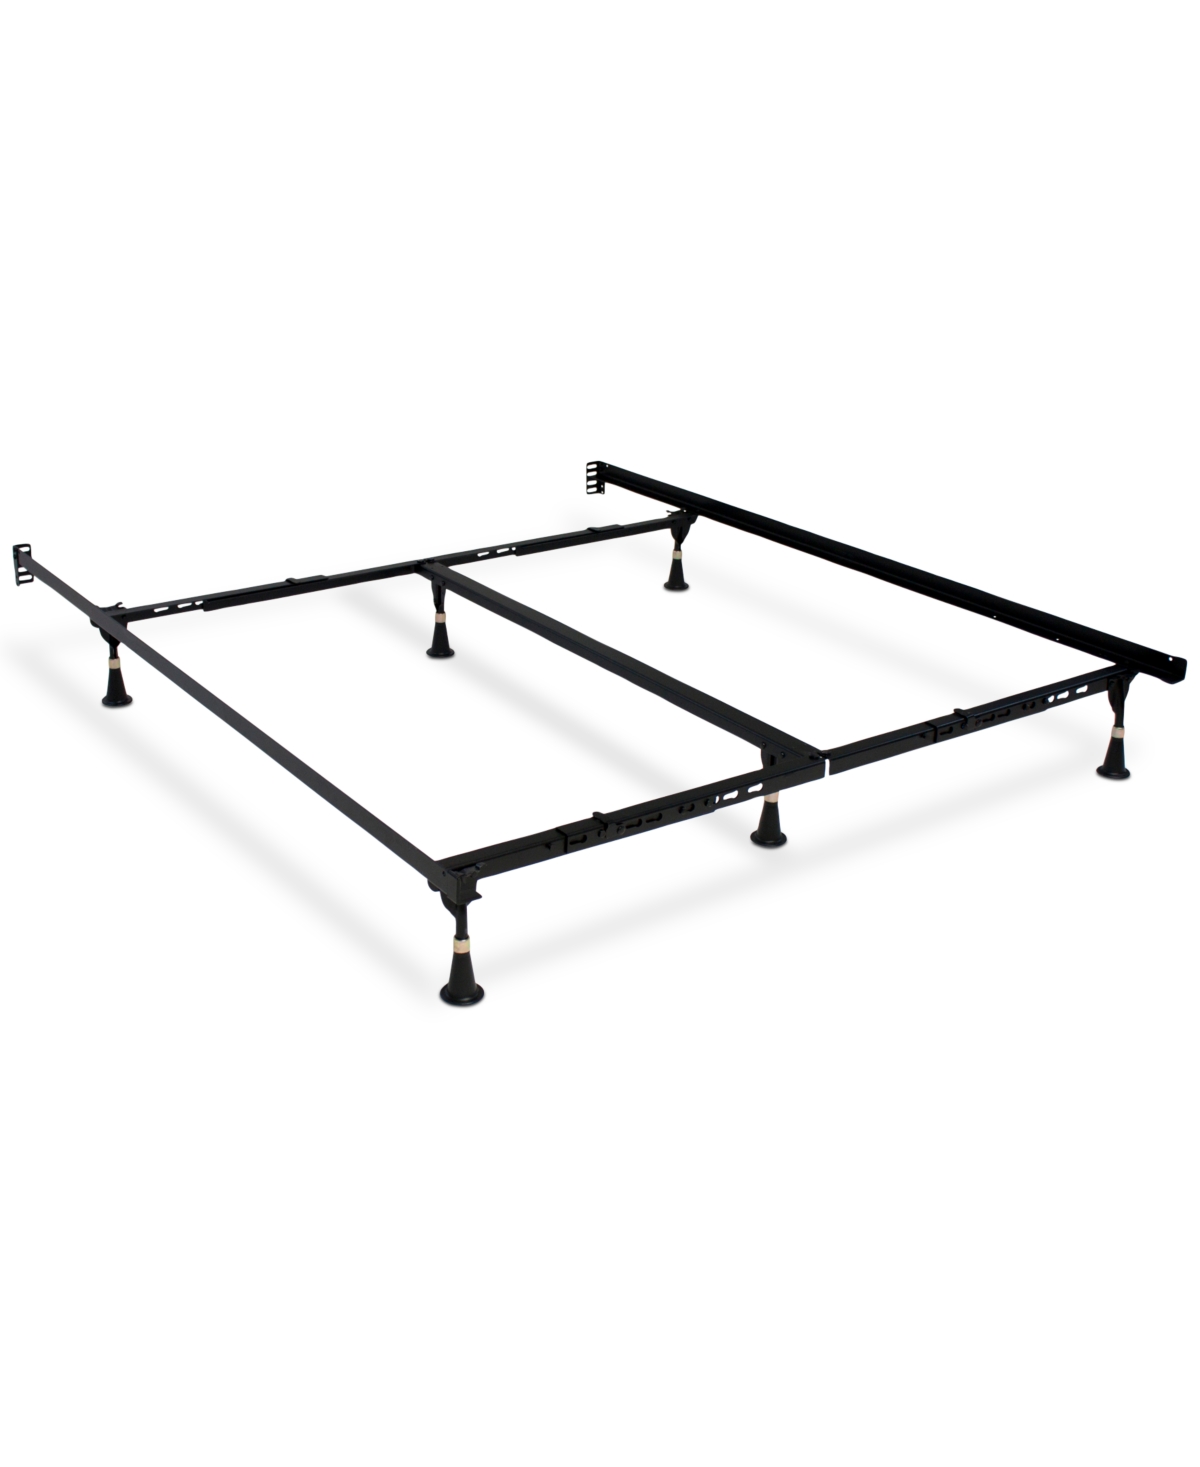 Hollywood Premium Lev-r-Lock Bed Frame with Glide, Quick Ship - Silver